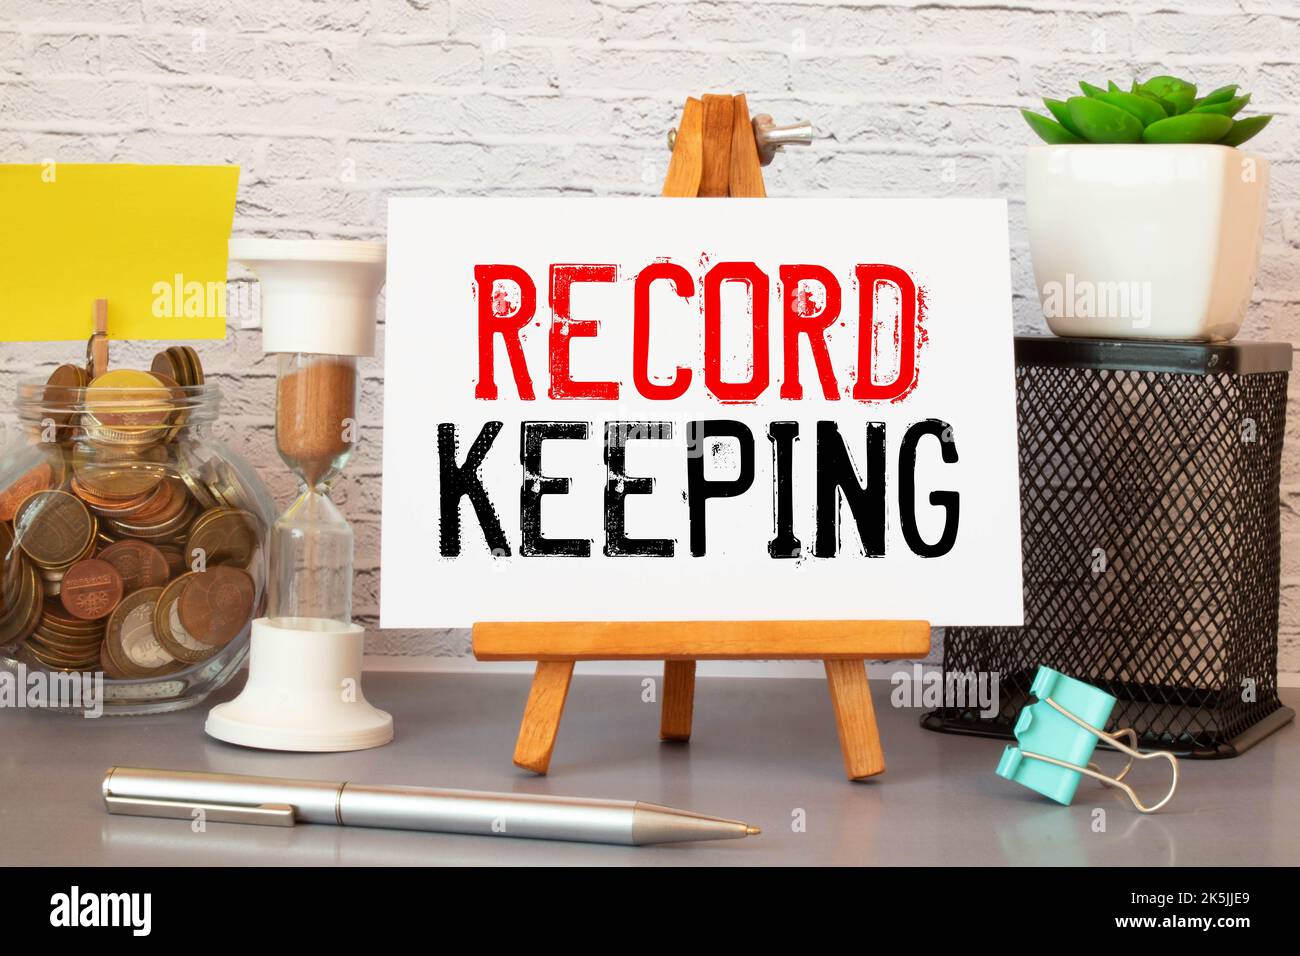 Word text RECORD KEEPING on white paper. Stock Photo